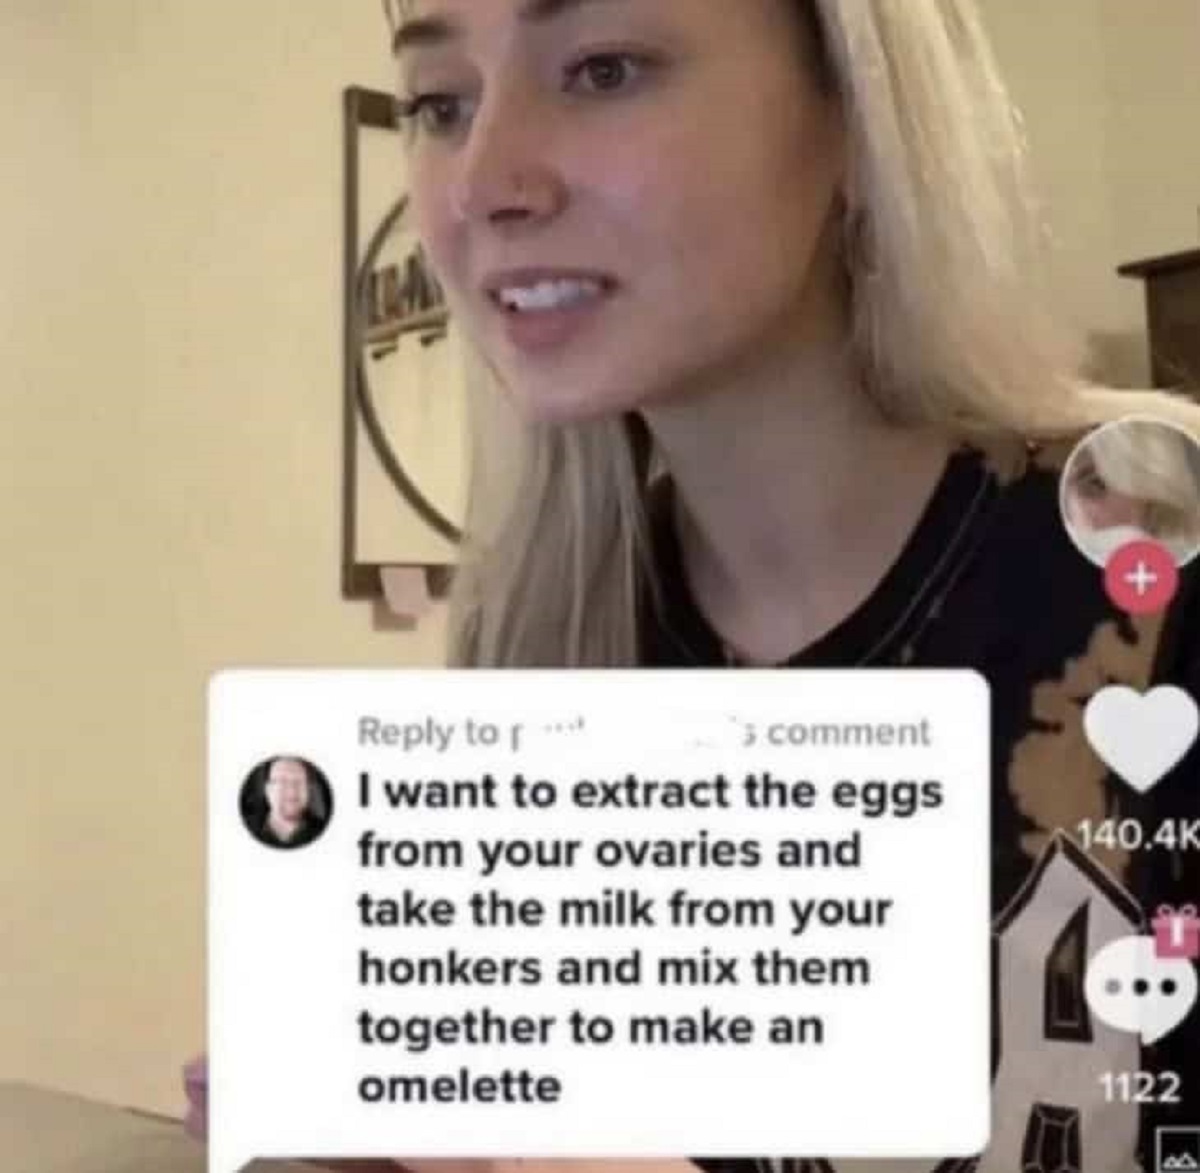 human omelette - La comment to f I want to extract the eggs from your ovaries and take the milk from your honkers and mix them together to make an omelette 1122